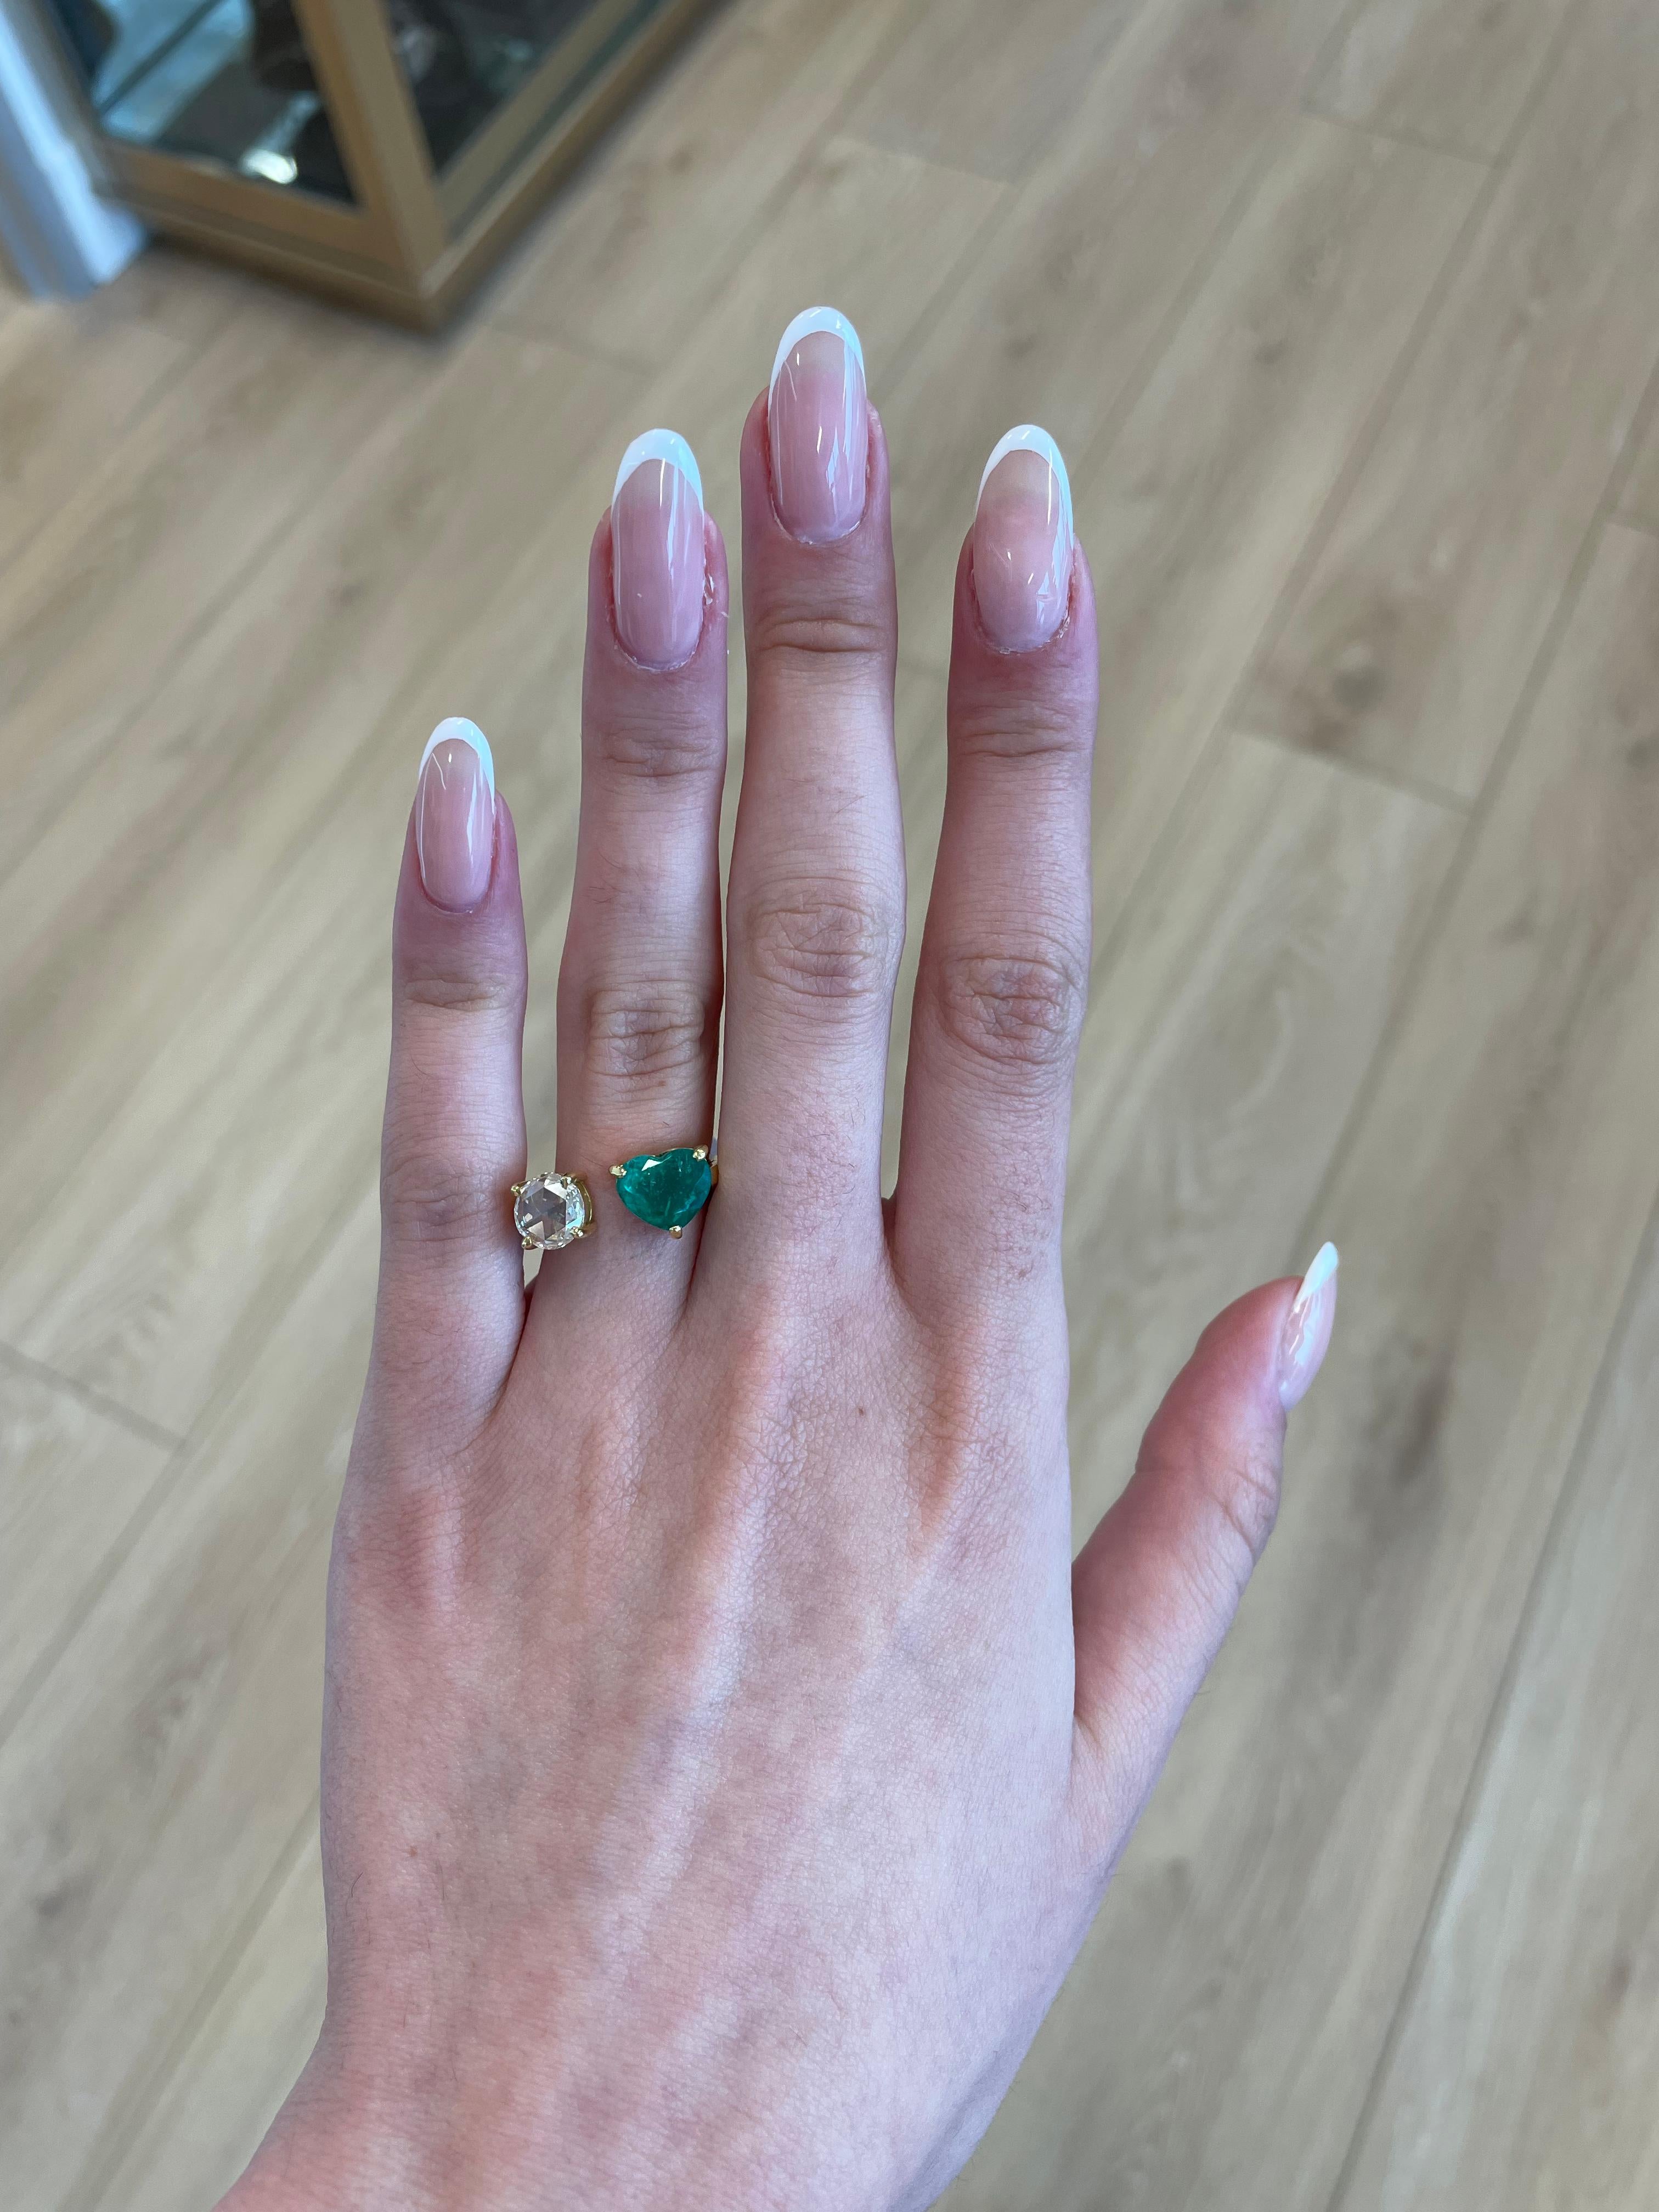 Stunning modern floating emerald and diamond toi et moi ring. By Alexander Beverly Hills.
1 heart shape emeralds, 2.10 carats apx F2. 1 round rose cut diamond 0.87 carats, approximately G/H color and vs clarity. 18-karat yellow gold, 5.27 grams,